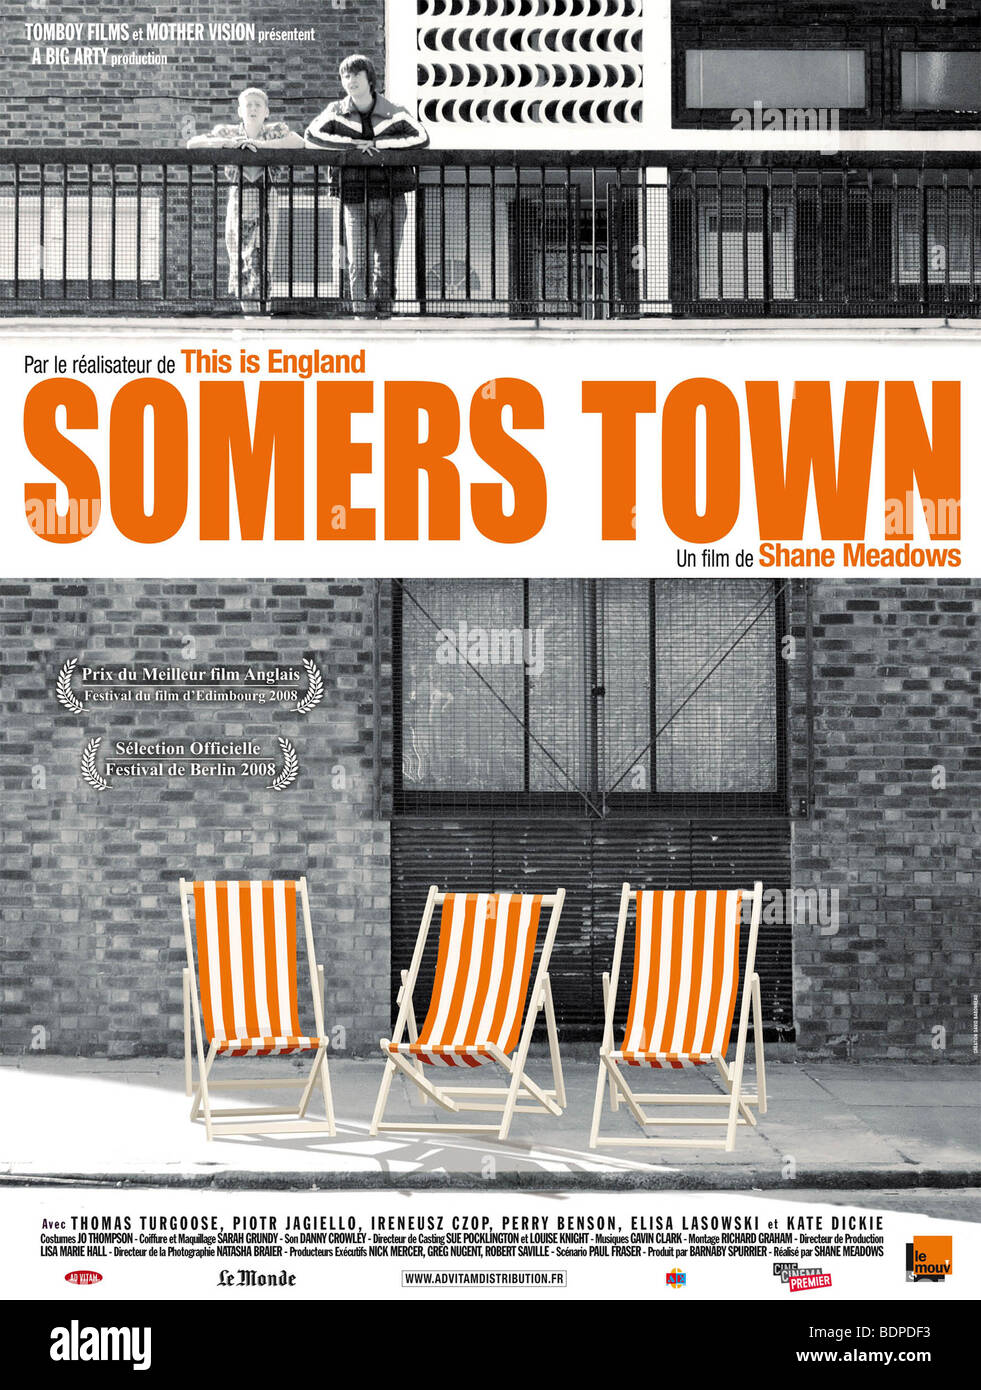 Somers Town Anno : 2008 Direttore : Shane Meadows poster (Fr) Foto Stock